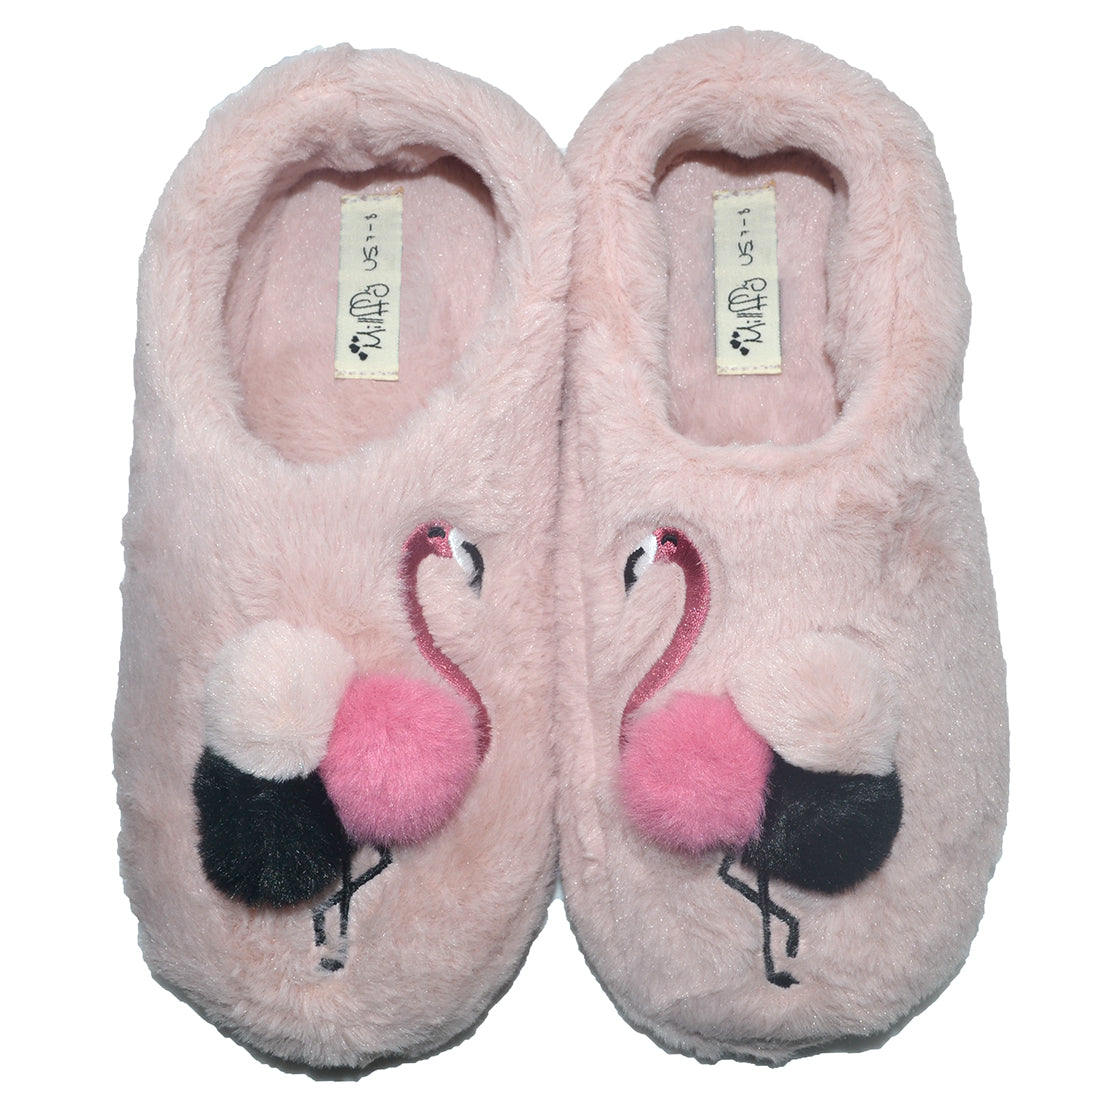 Millffy cartoon slippers heeled slippers flamingo slippers for women bear shoes slippers